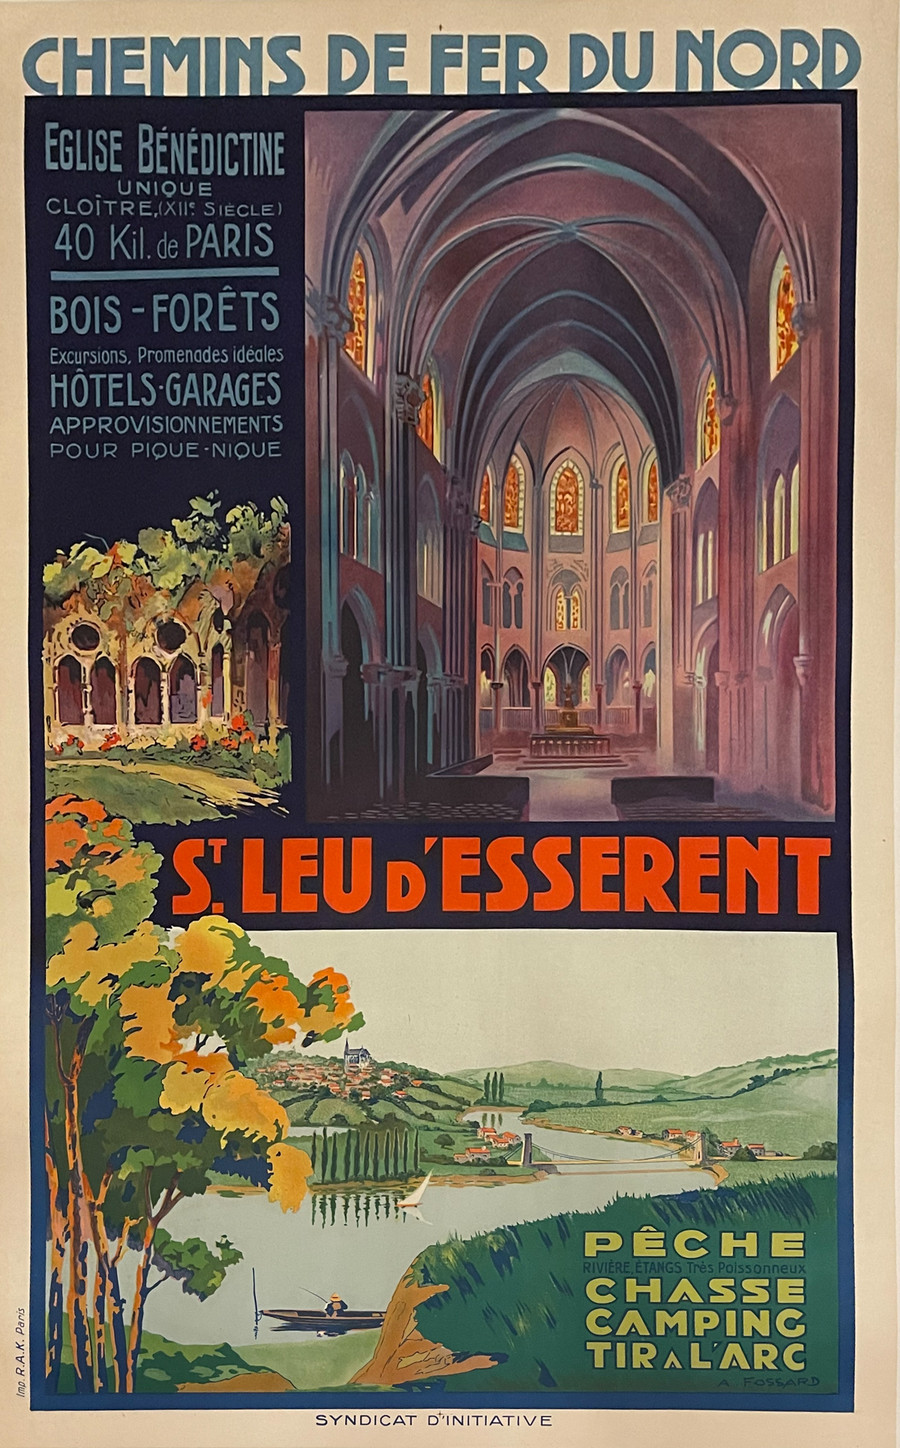 St. Leu D'Esserent by A Fossard-original 1920 vintage French travel advertisement stone lithograph poster-linen backed.